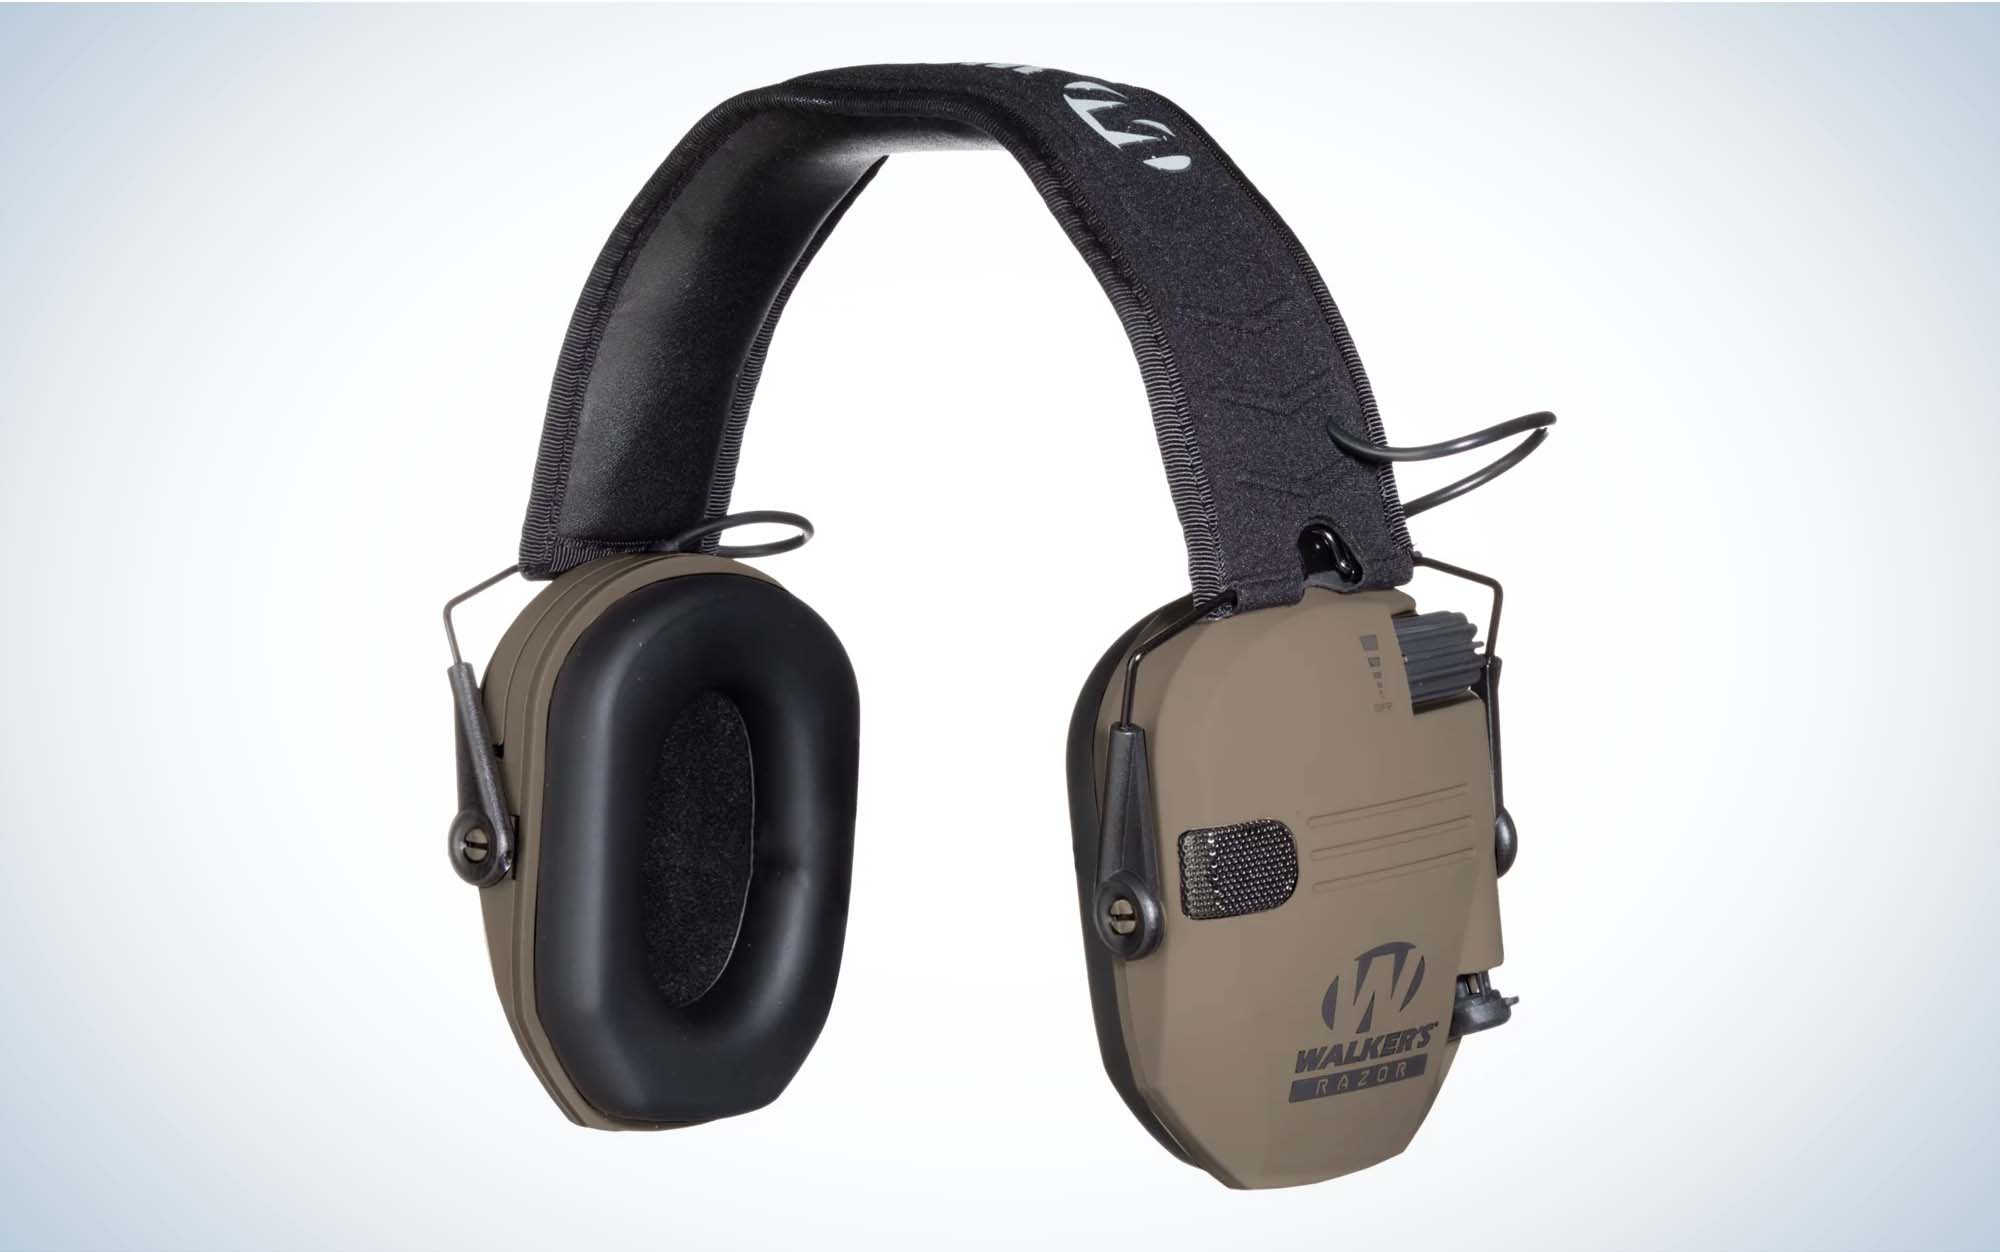 Details about   Ear Muffs For Shooting Hearing Protection Noise Cancelling Headphones Defenders 